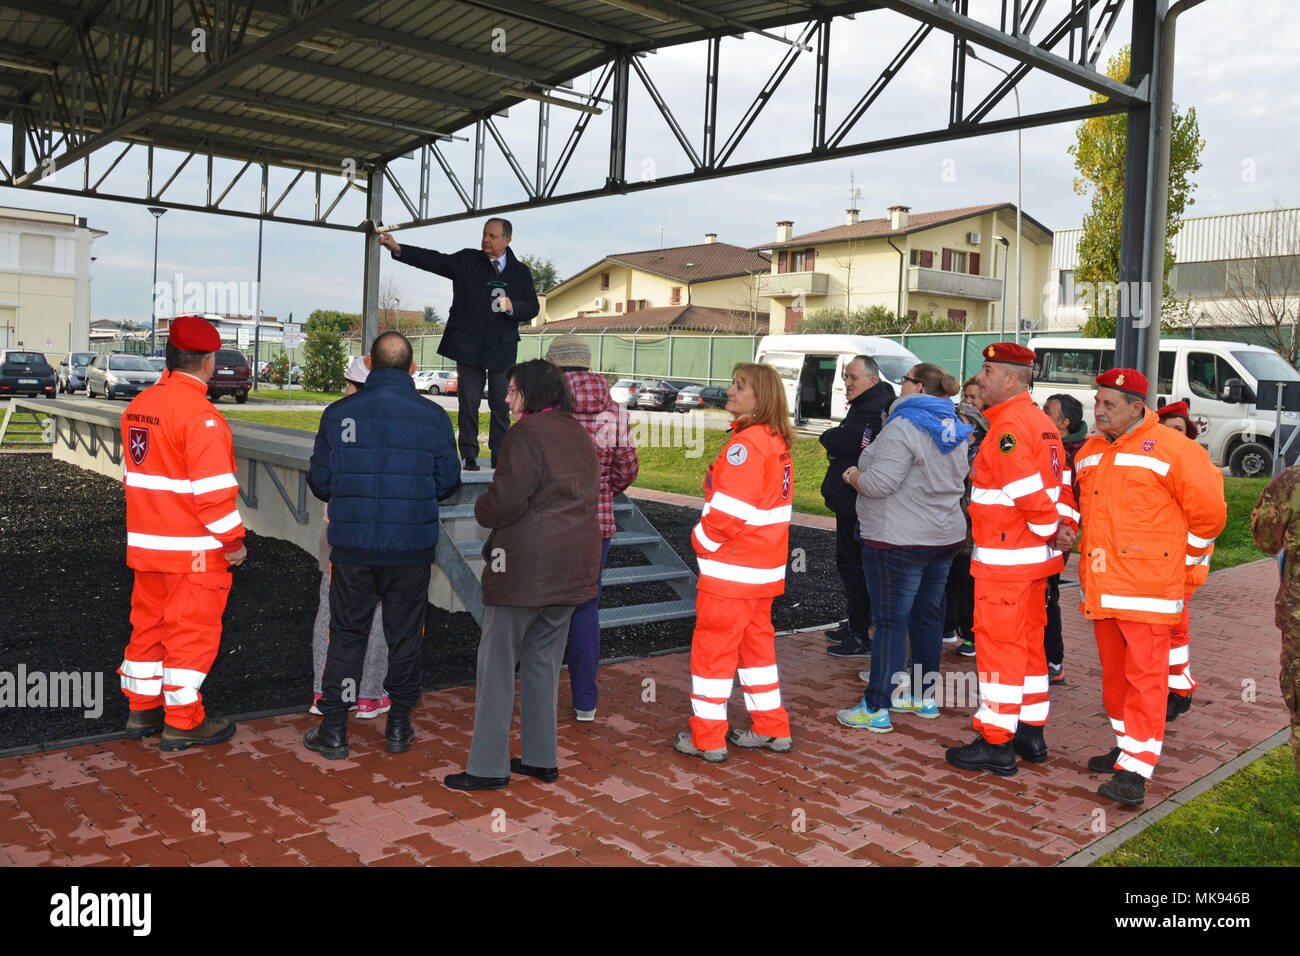 Ivano Trevisanutto, chief, Training Support Center Italy, shows the training facility area to a delegation from “Associazione Il Nuovo Ponte” and Sovereign Military Order, during a visit to Caserma Ederle Nov. 28, 2017. Associazione Il Nuovo Ponte is a social solidarity cooperative that since 1984 runs Social-Health Services for people with disabilities. (U.S. Army photo by Paolo Bovo) Stock Photo